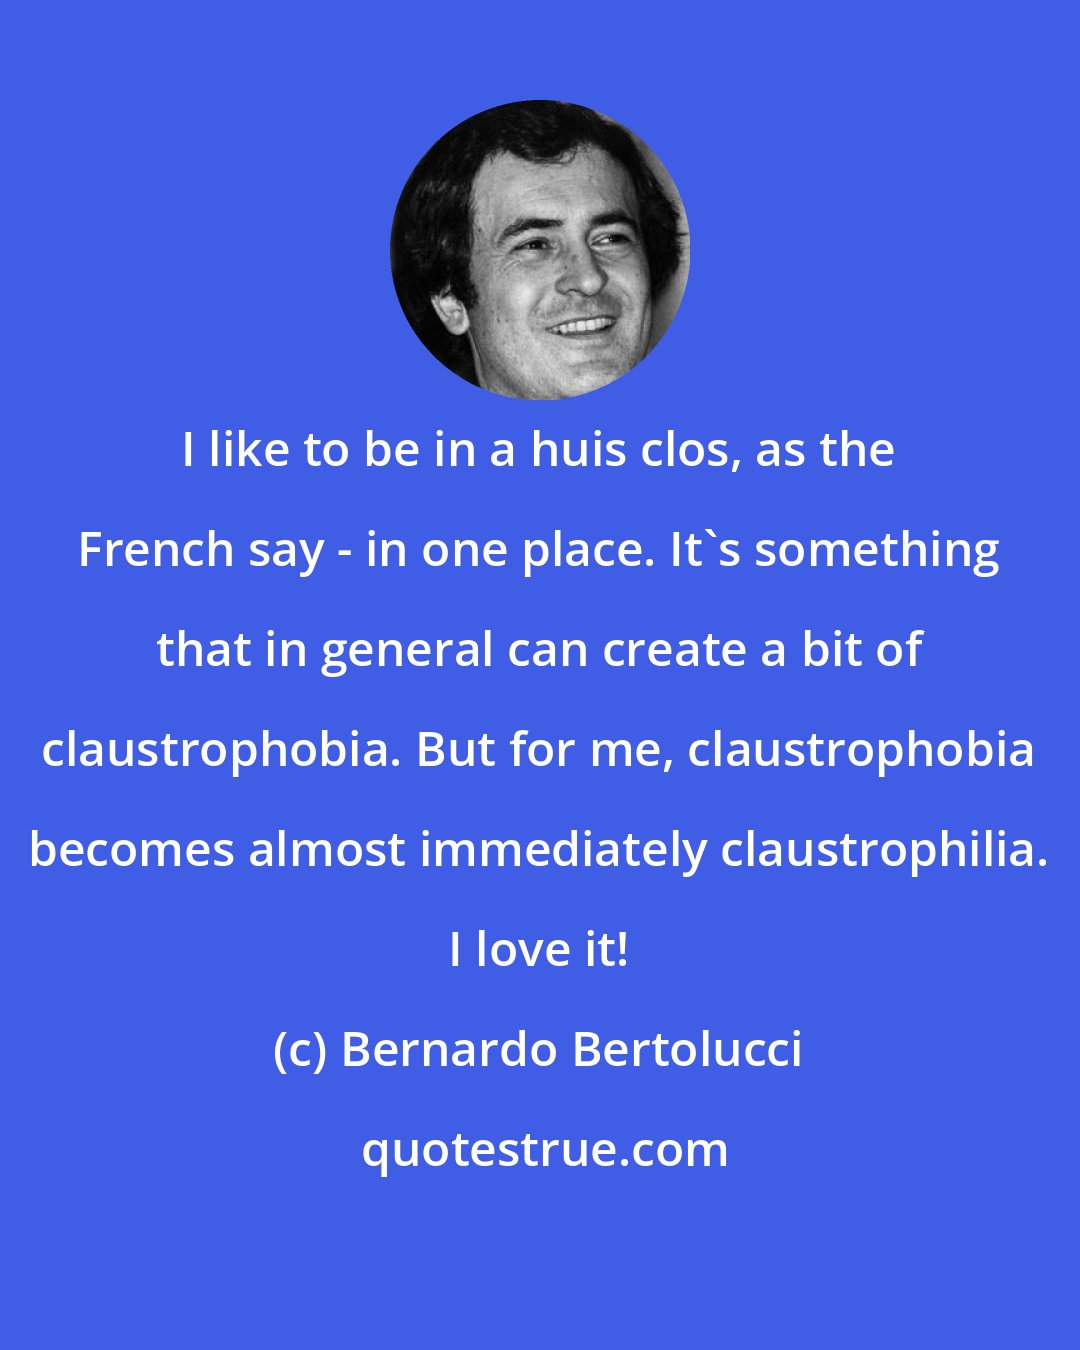 Bernardo Bertolucci: I like to be in a huis clos, as the French say - in one place. It's something that in general can create a bit of claustrophobia. But for me, claustrophobia becomes almost immediately claustrophilia. I love it!